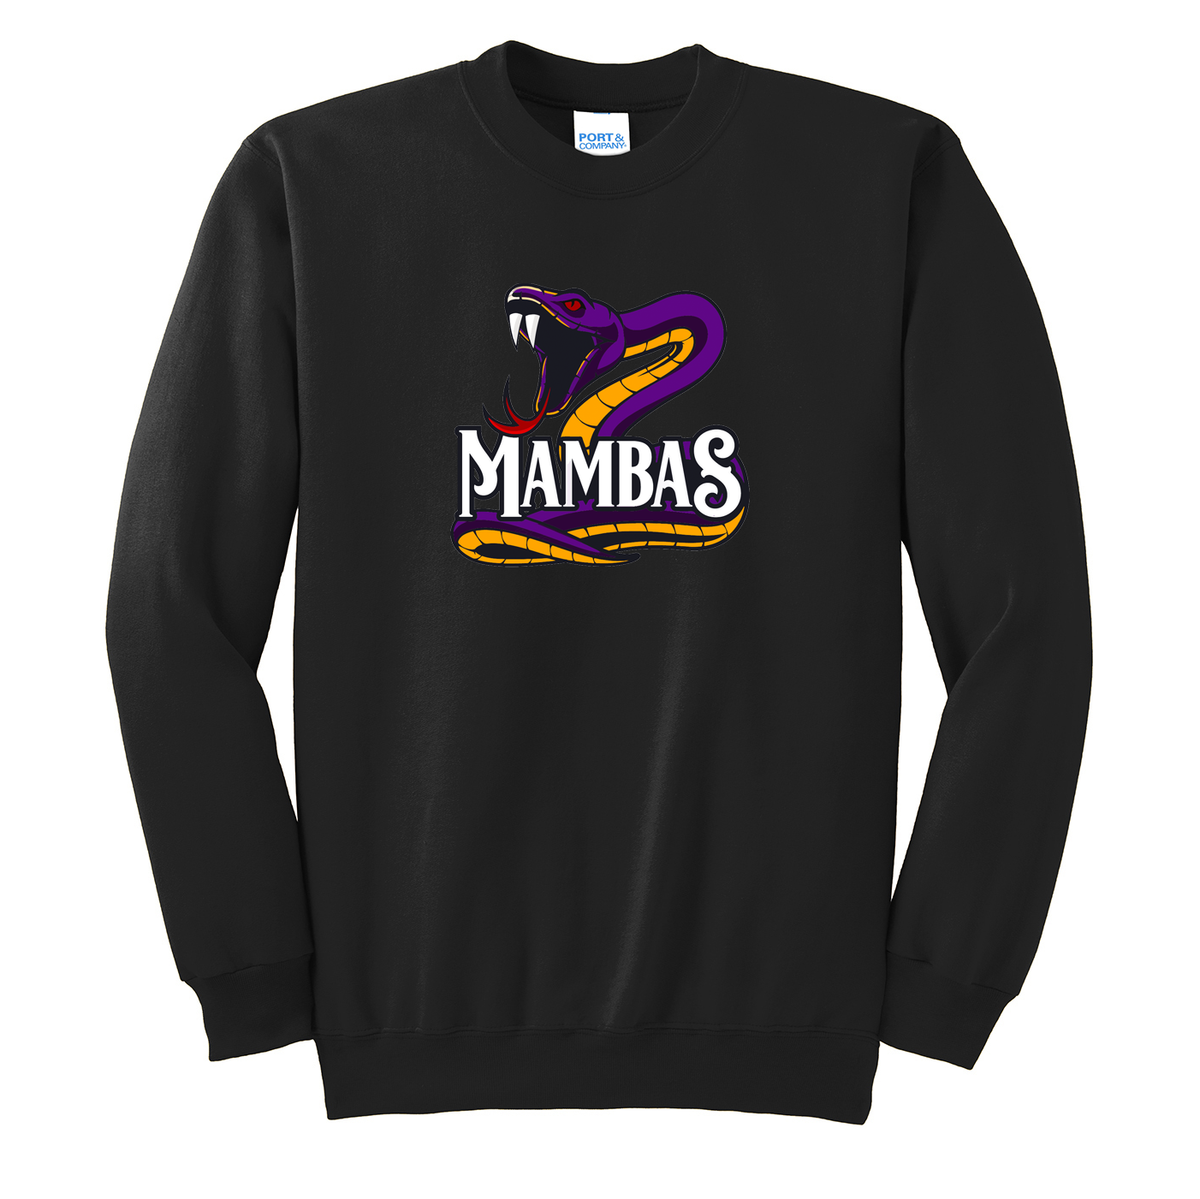 Mambas Basketball Crew Neck Sweater (Available in Youth Sizes)